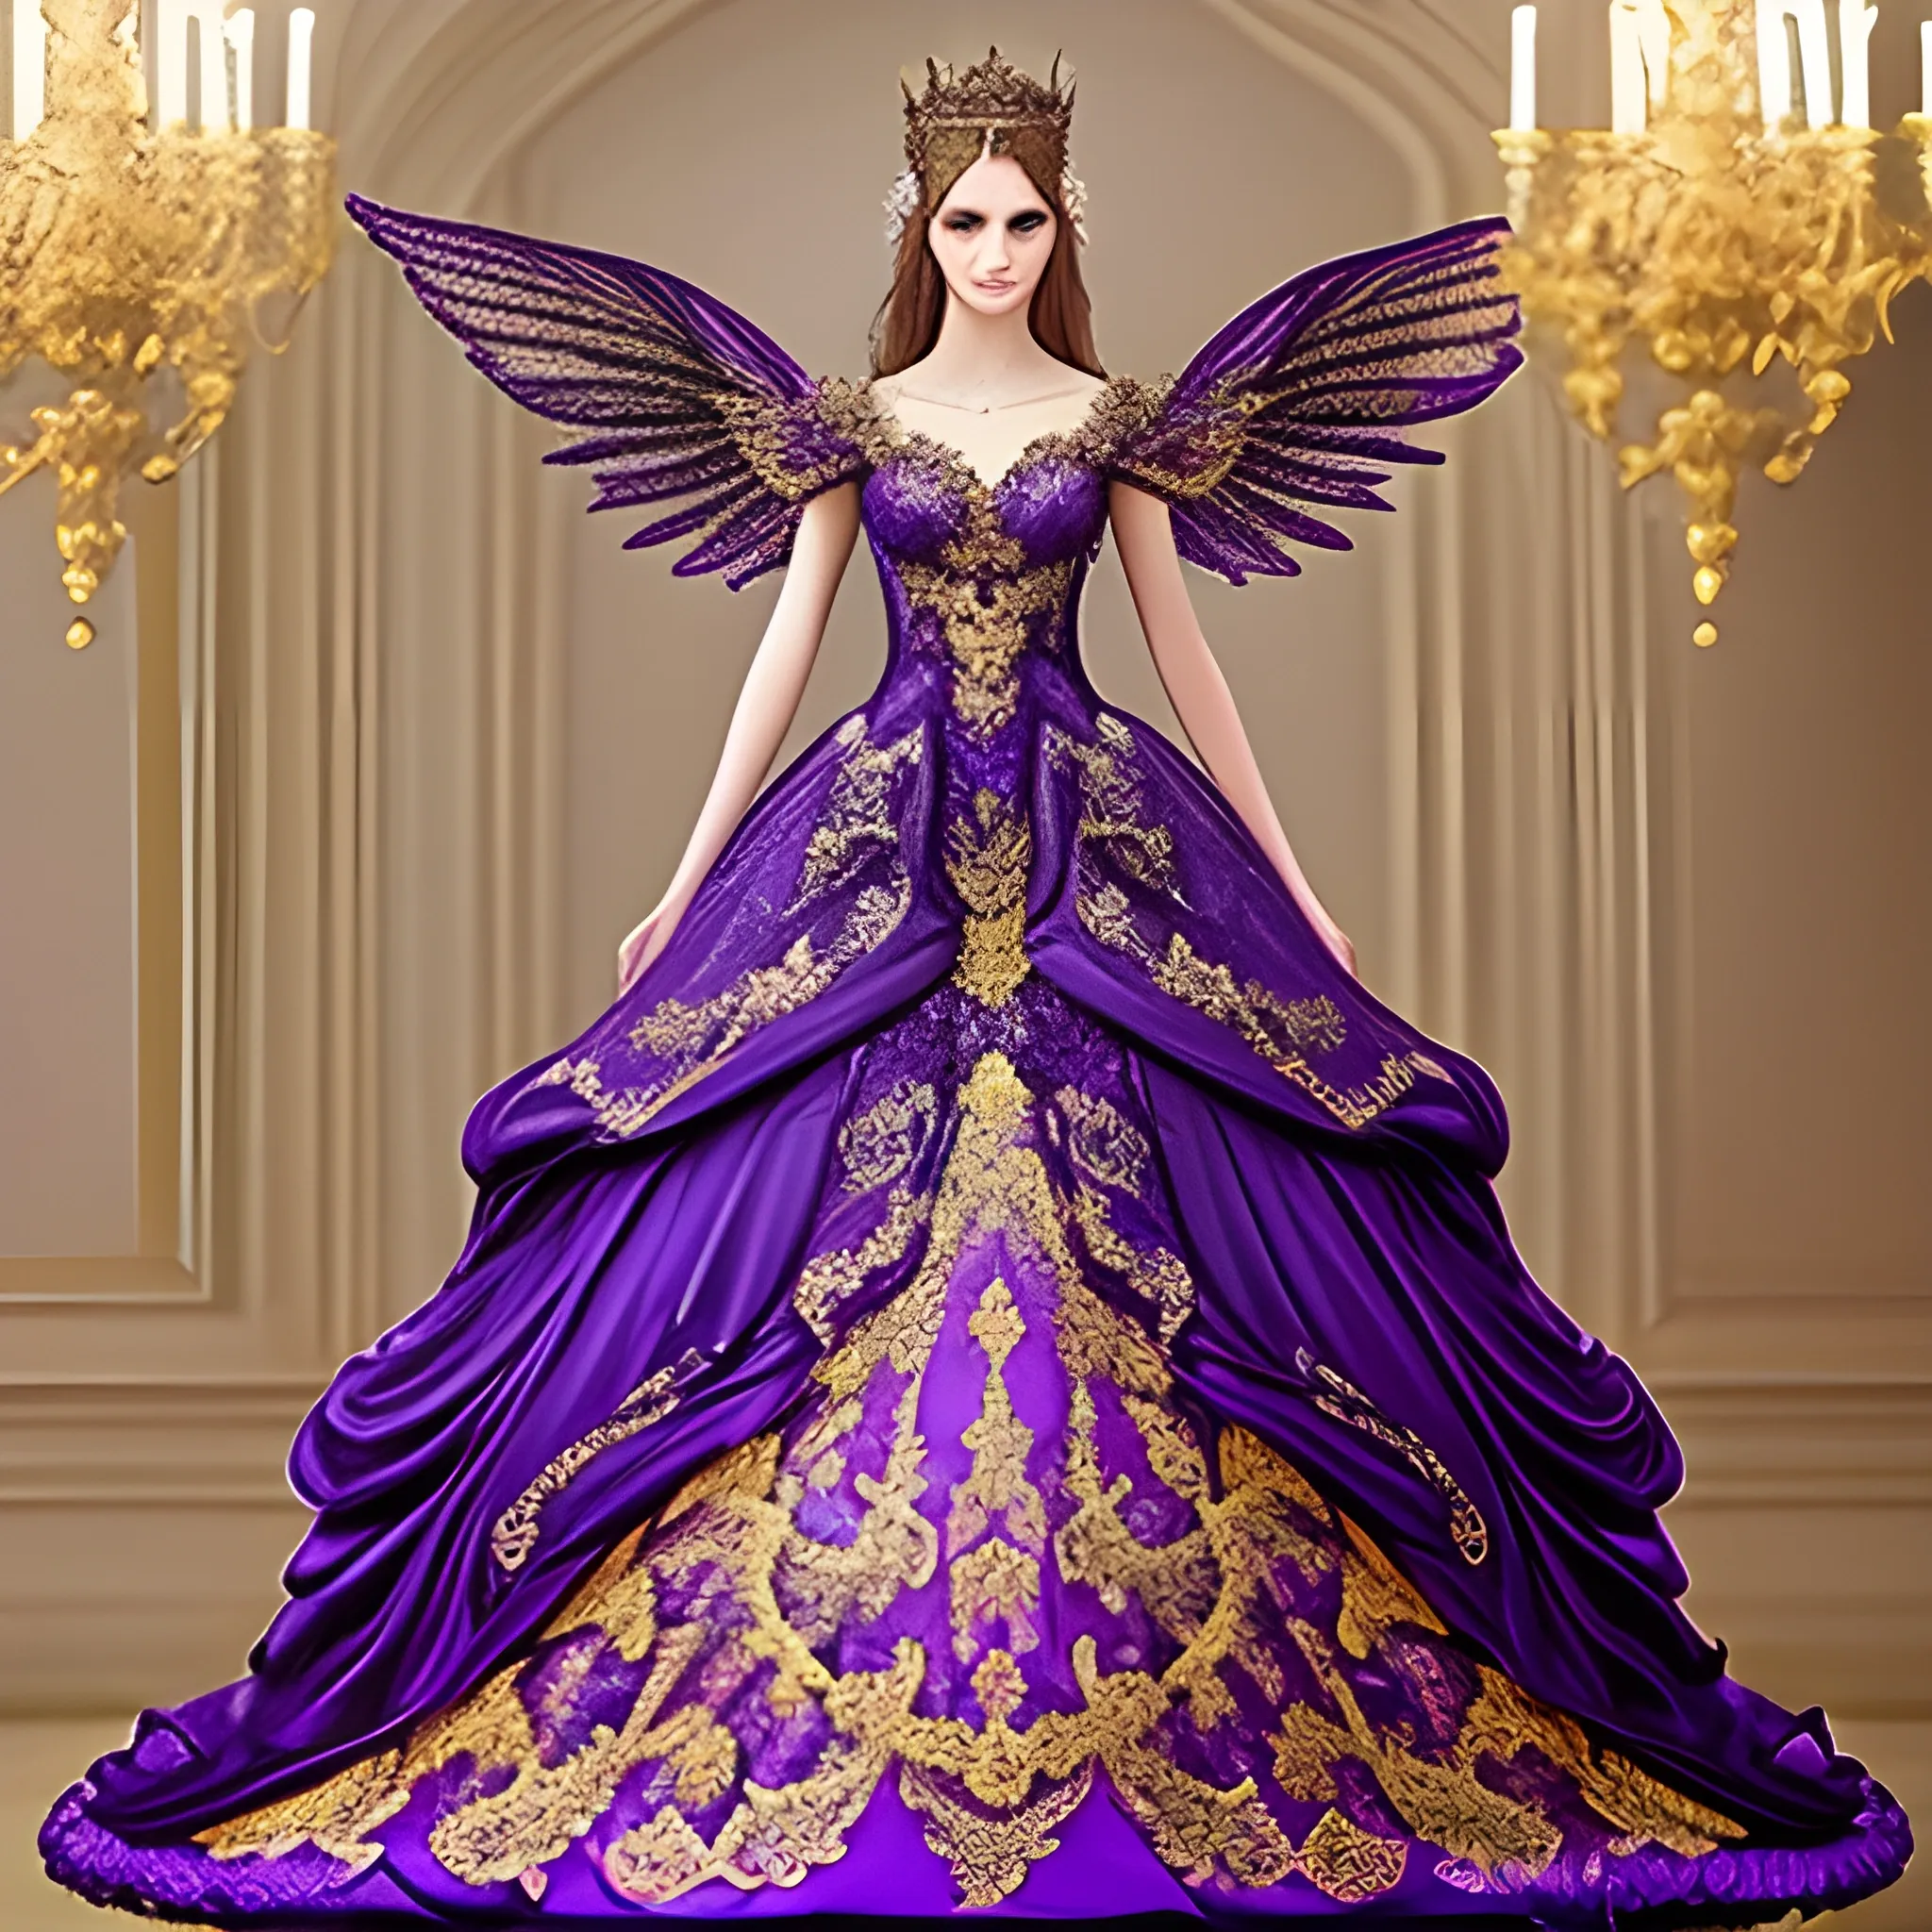 Intricate fantasy wedding gown purple and gold lace goddess wings crown style extravagant